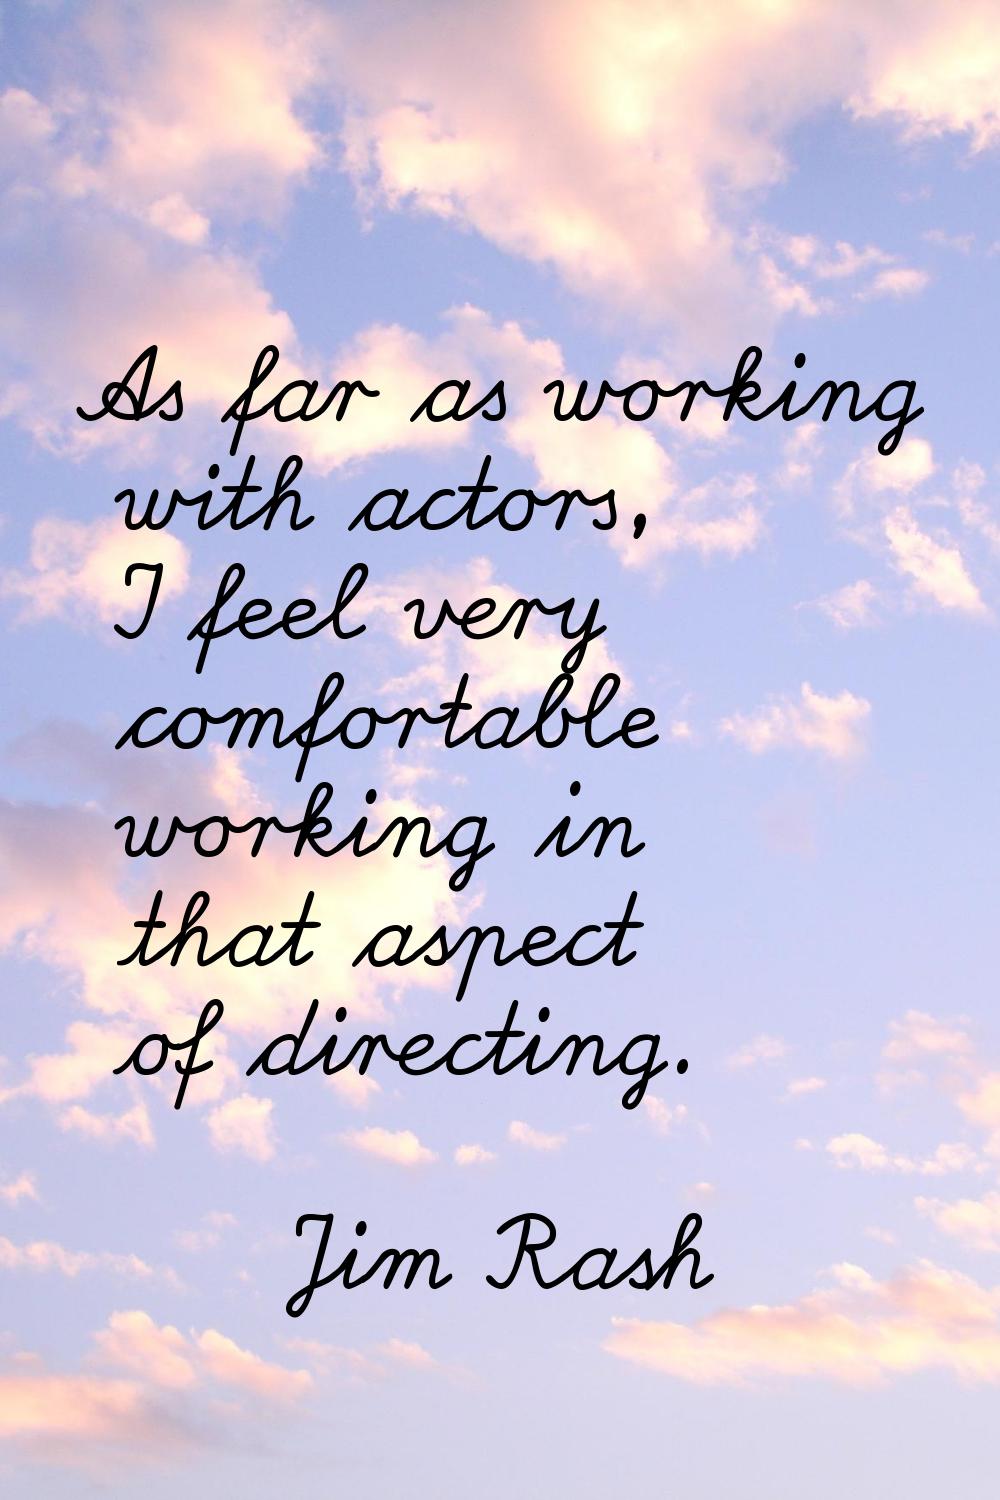 As far as working with actors, I feel very comfortable working in that aspect of directing.